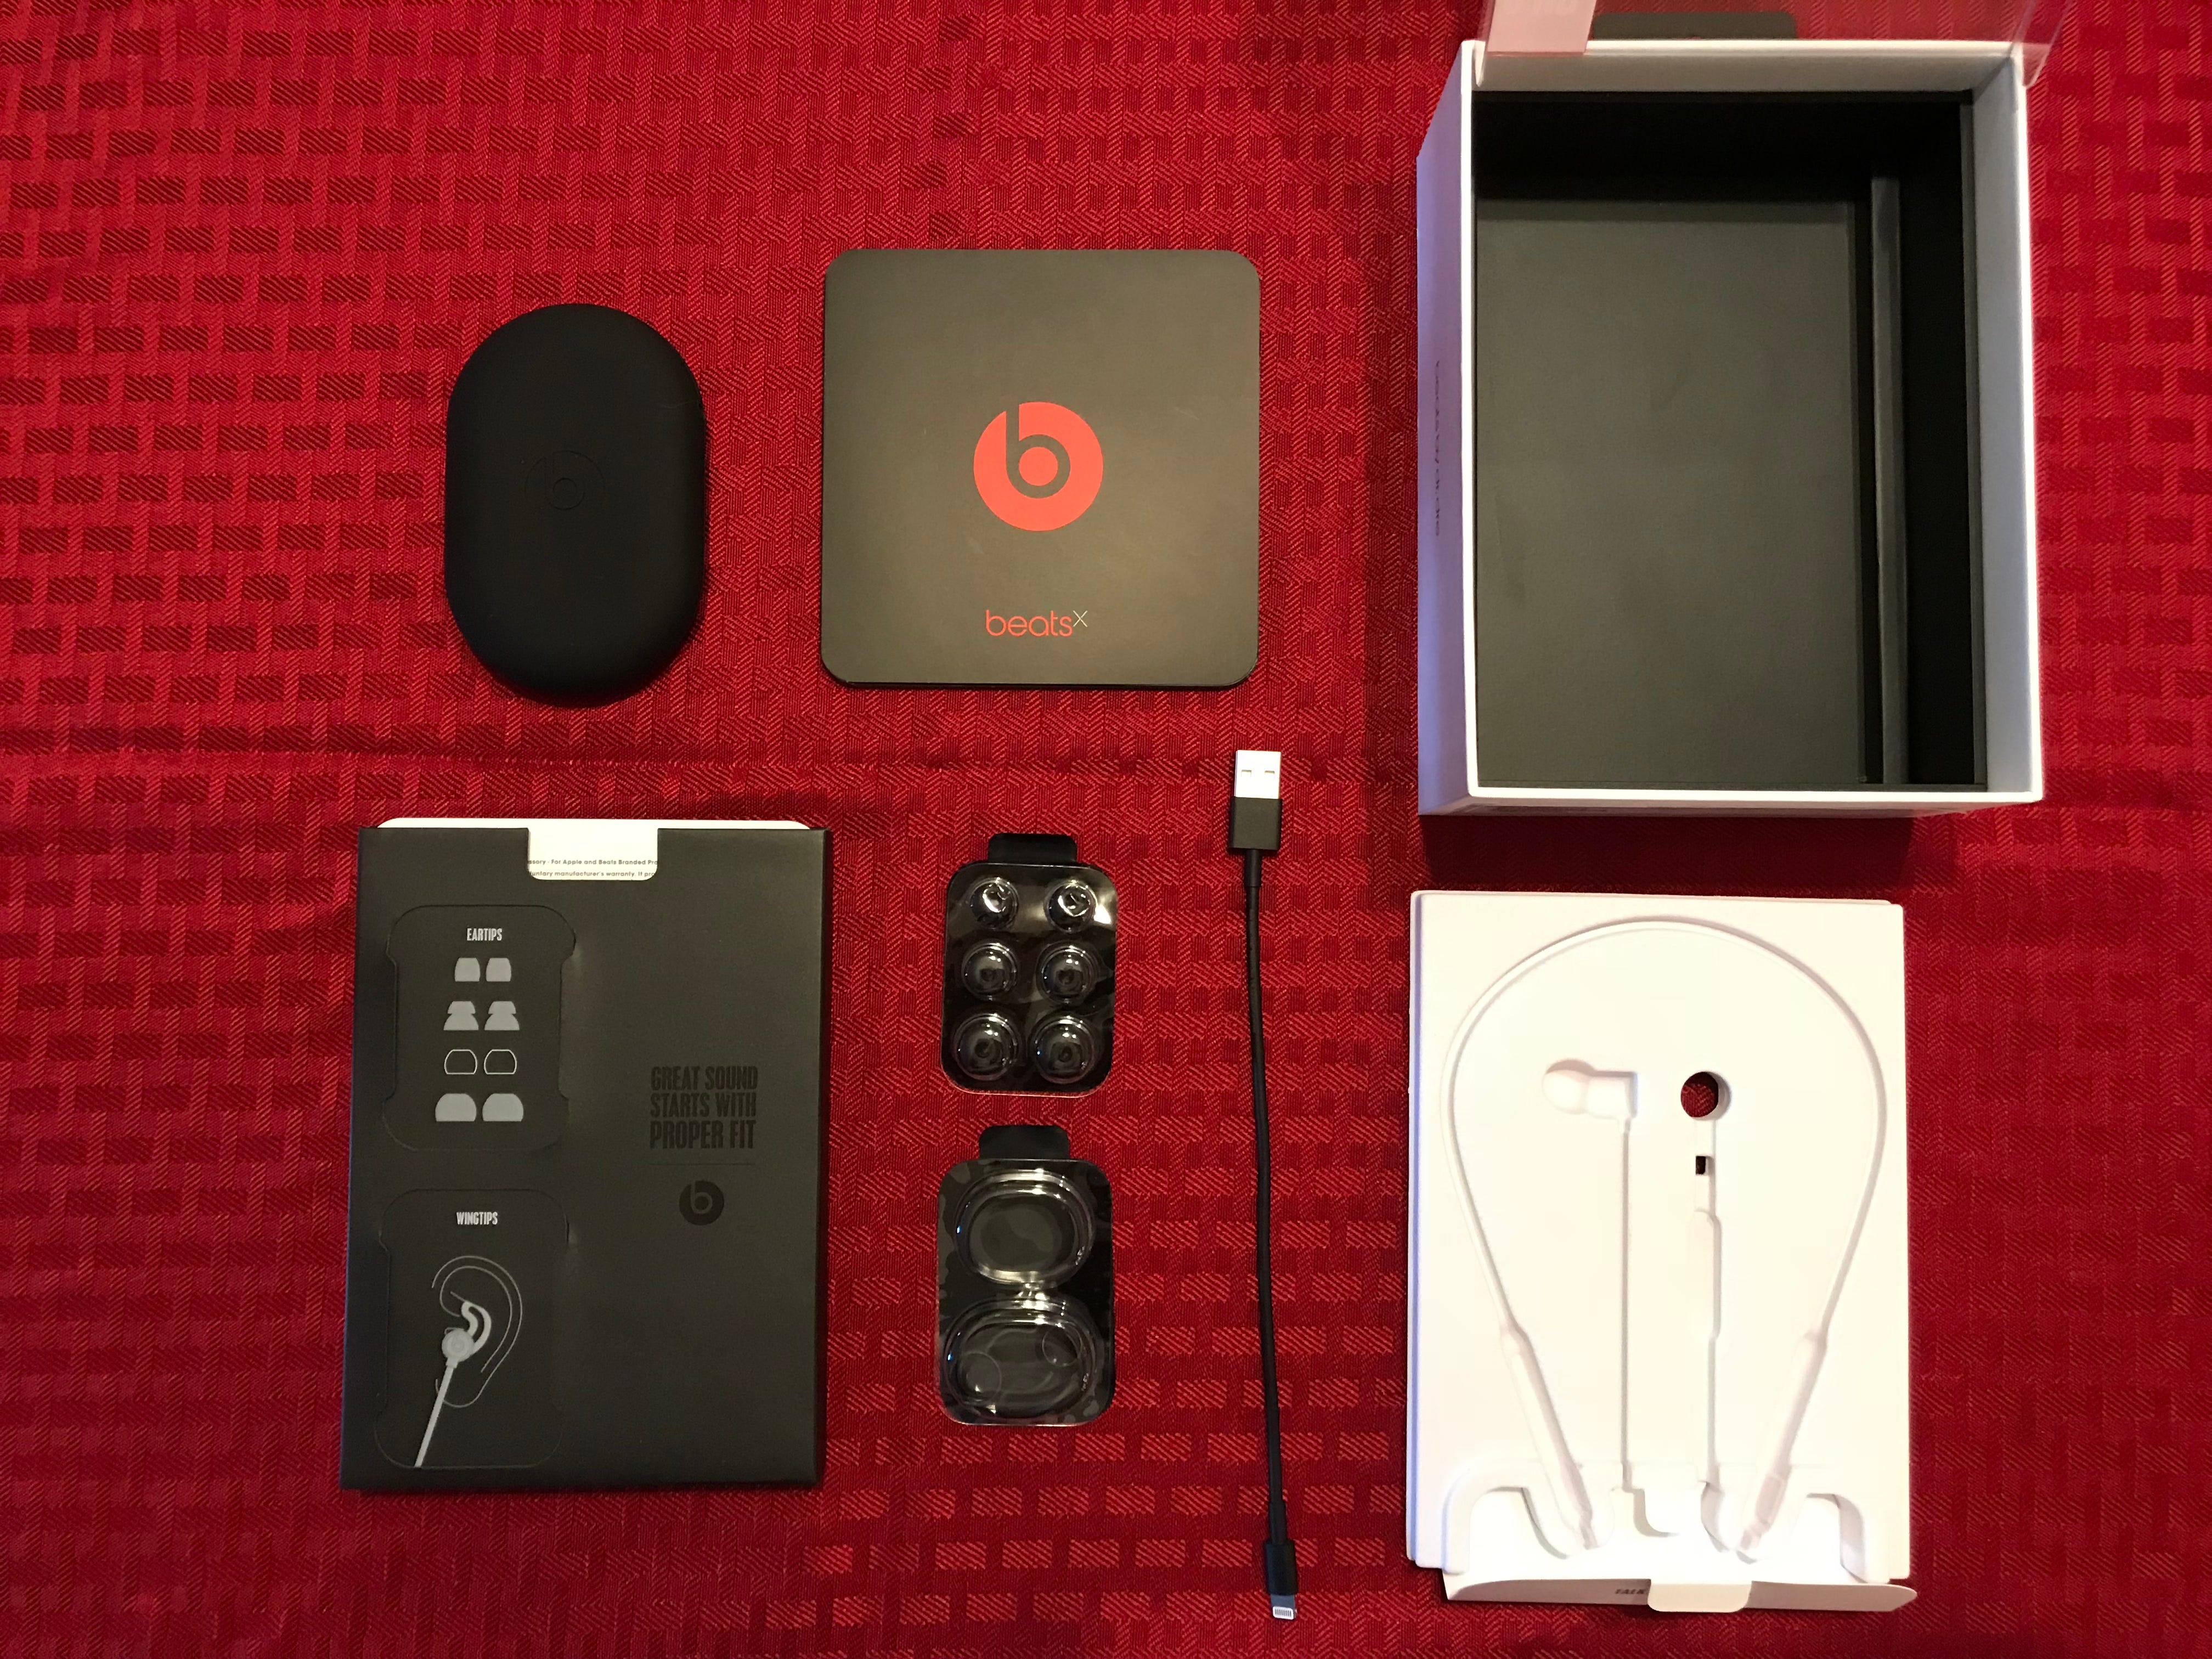 beats x what's in the box